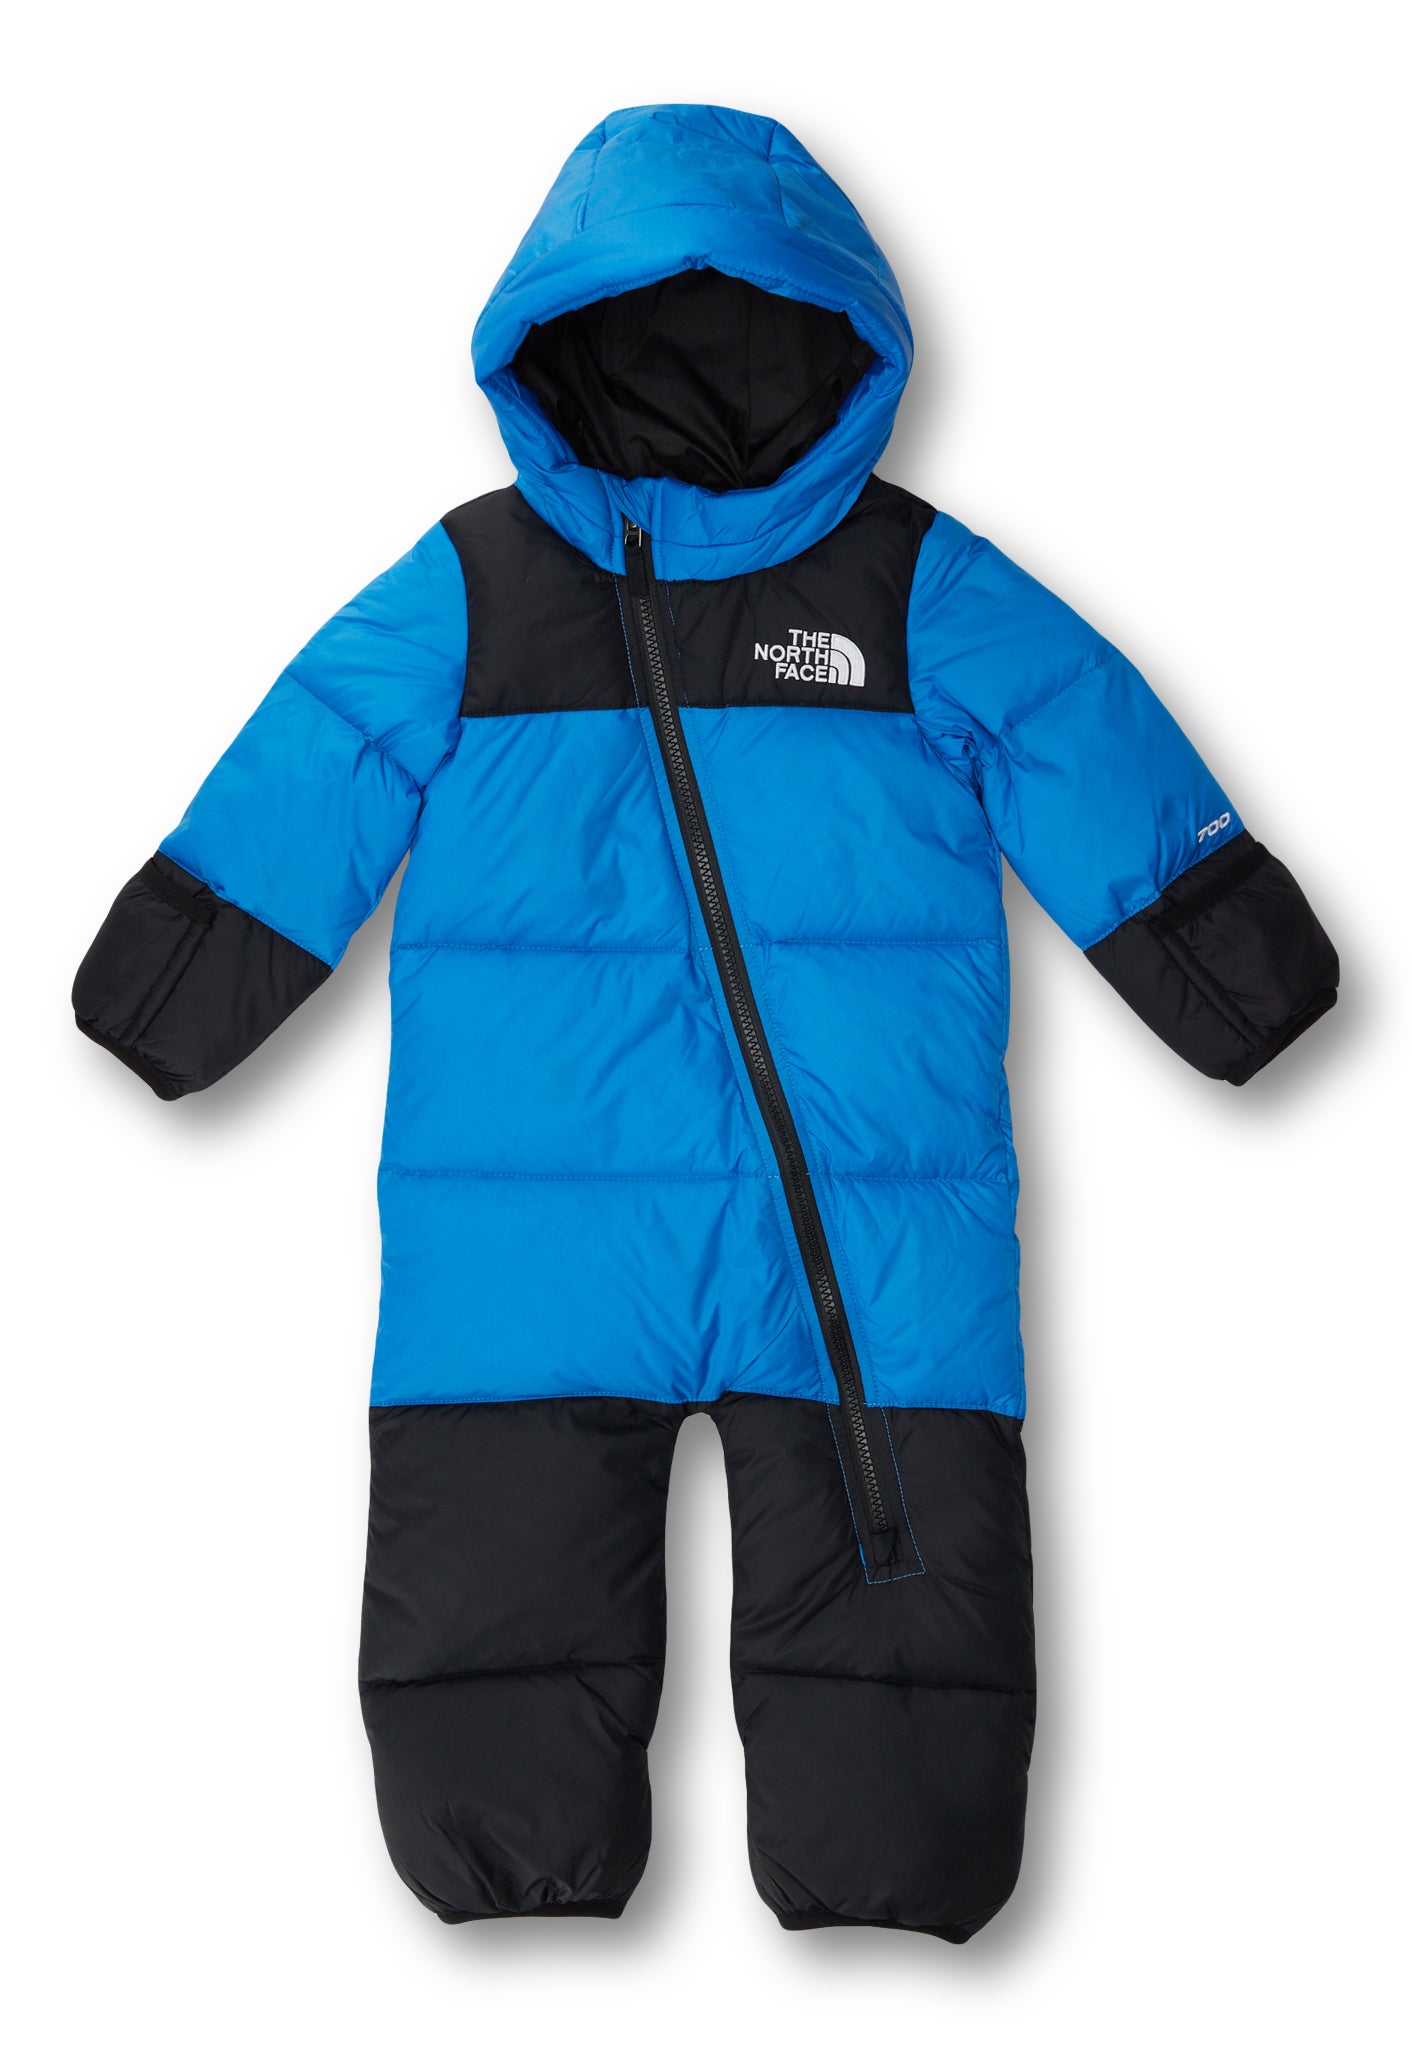 The North Face Nuptse One-Piece- Infant | Altitude Sports